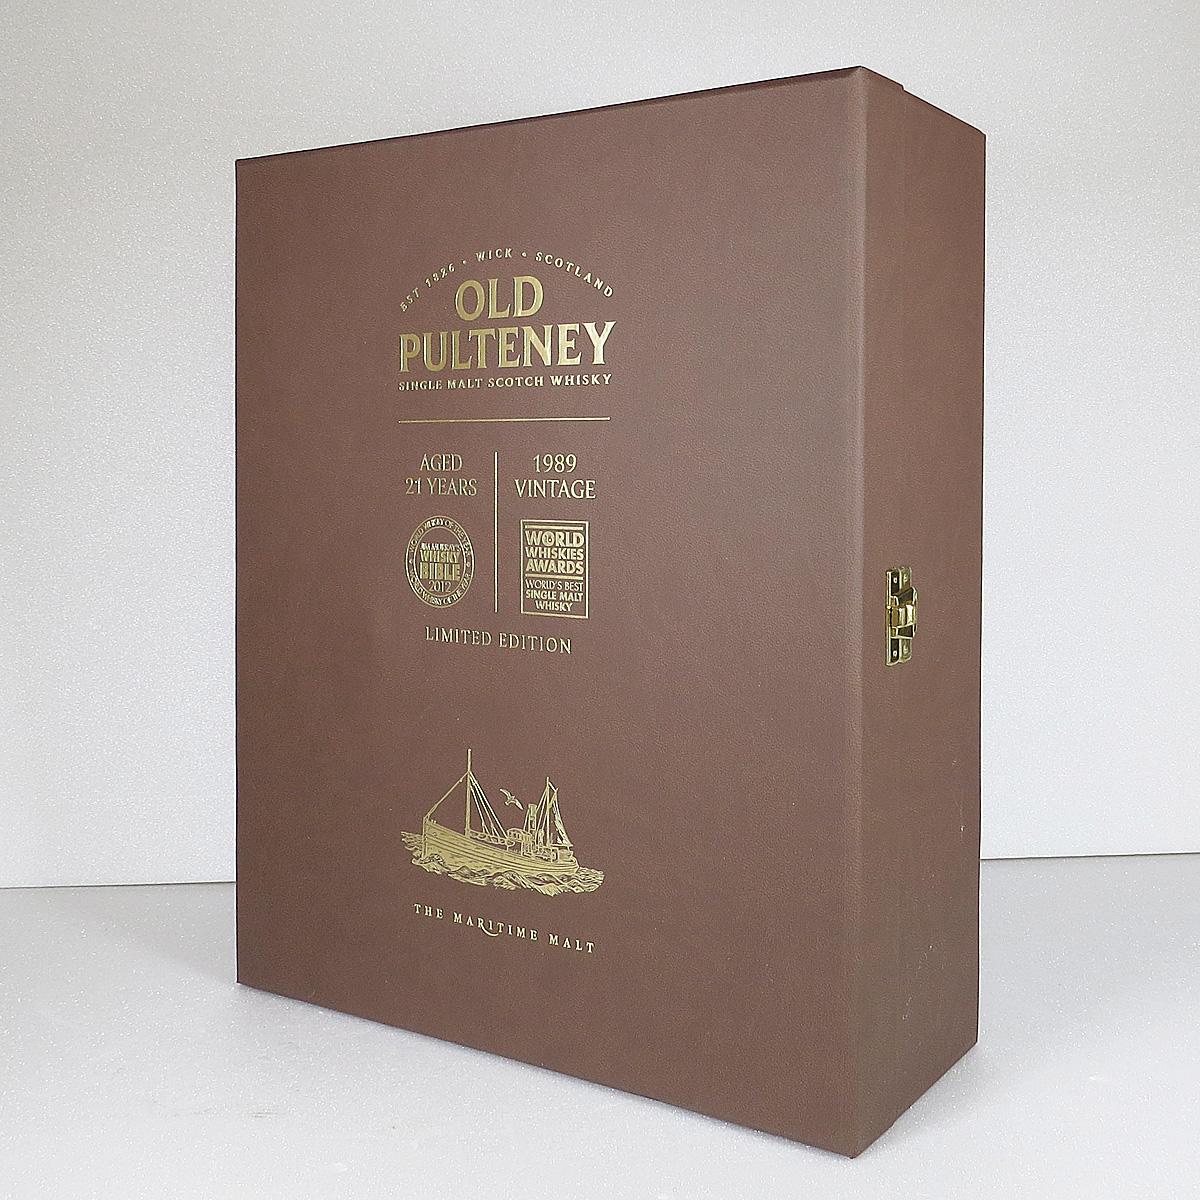 Old Pulteney 21 and 1989 2015 Set